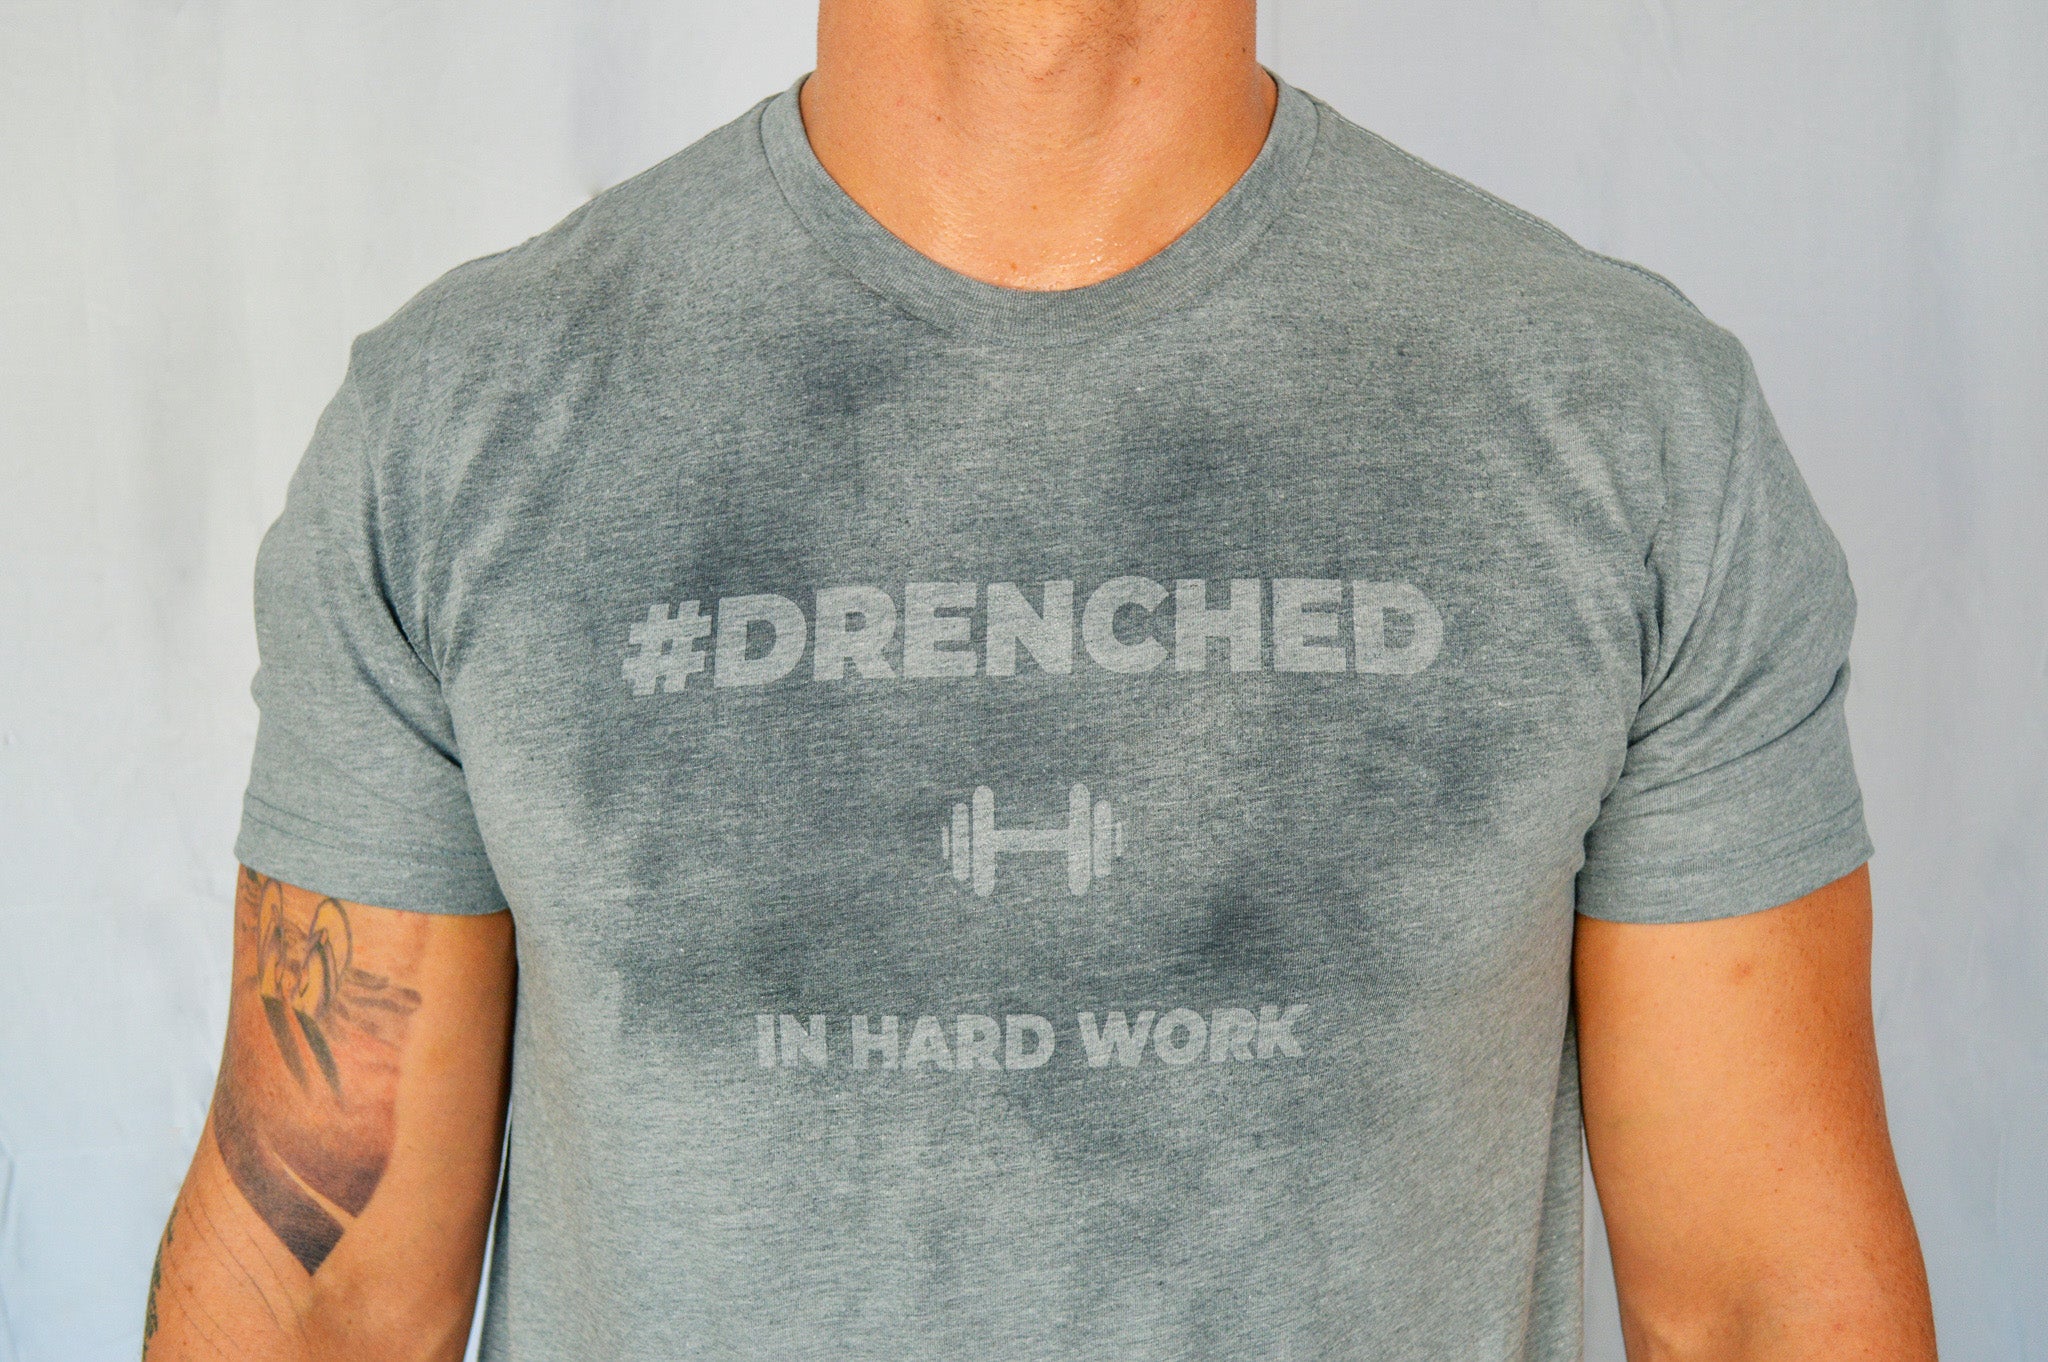 Drenched – Drenched Athletics Apparel